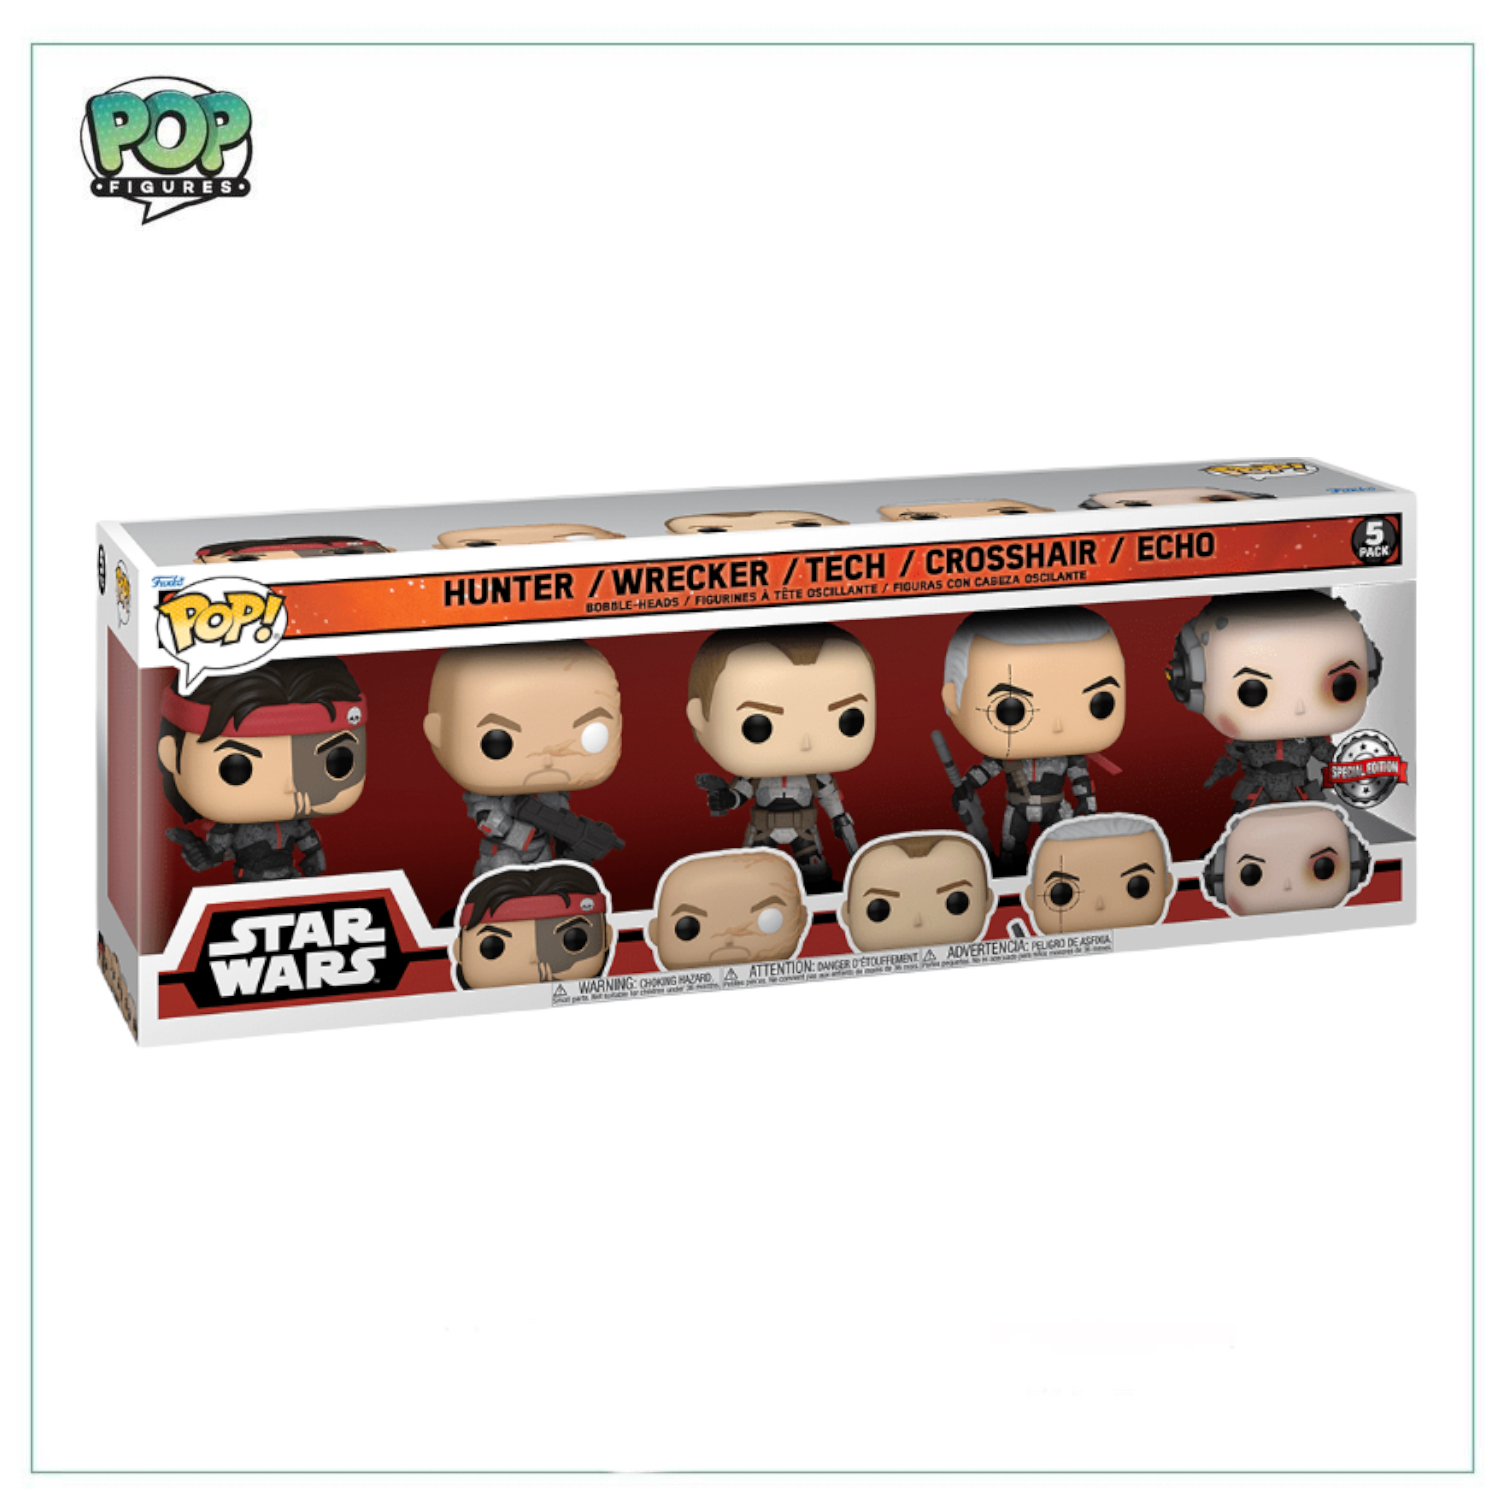 Hunter / Wrecker / Tech / Crosshair / Echo - Funko Deluxe 5 Pack! Star Wars - Special Edition - Angry Cat